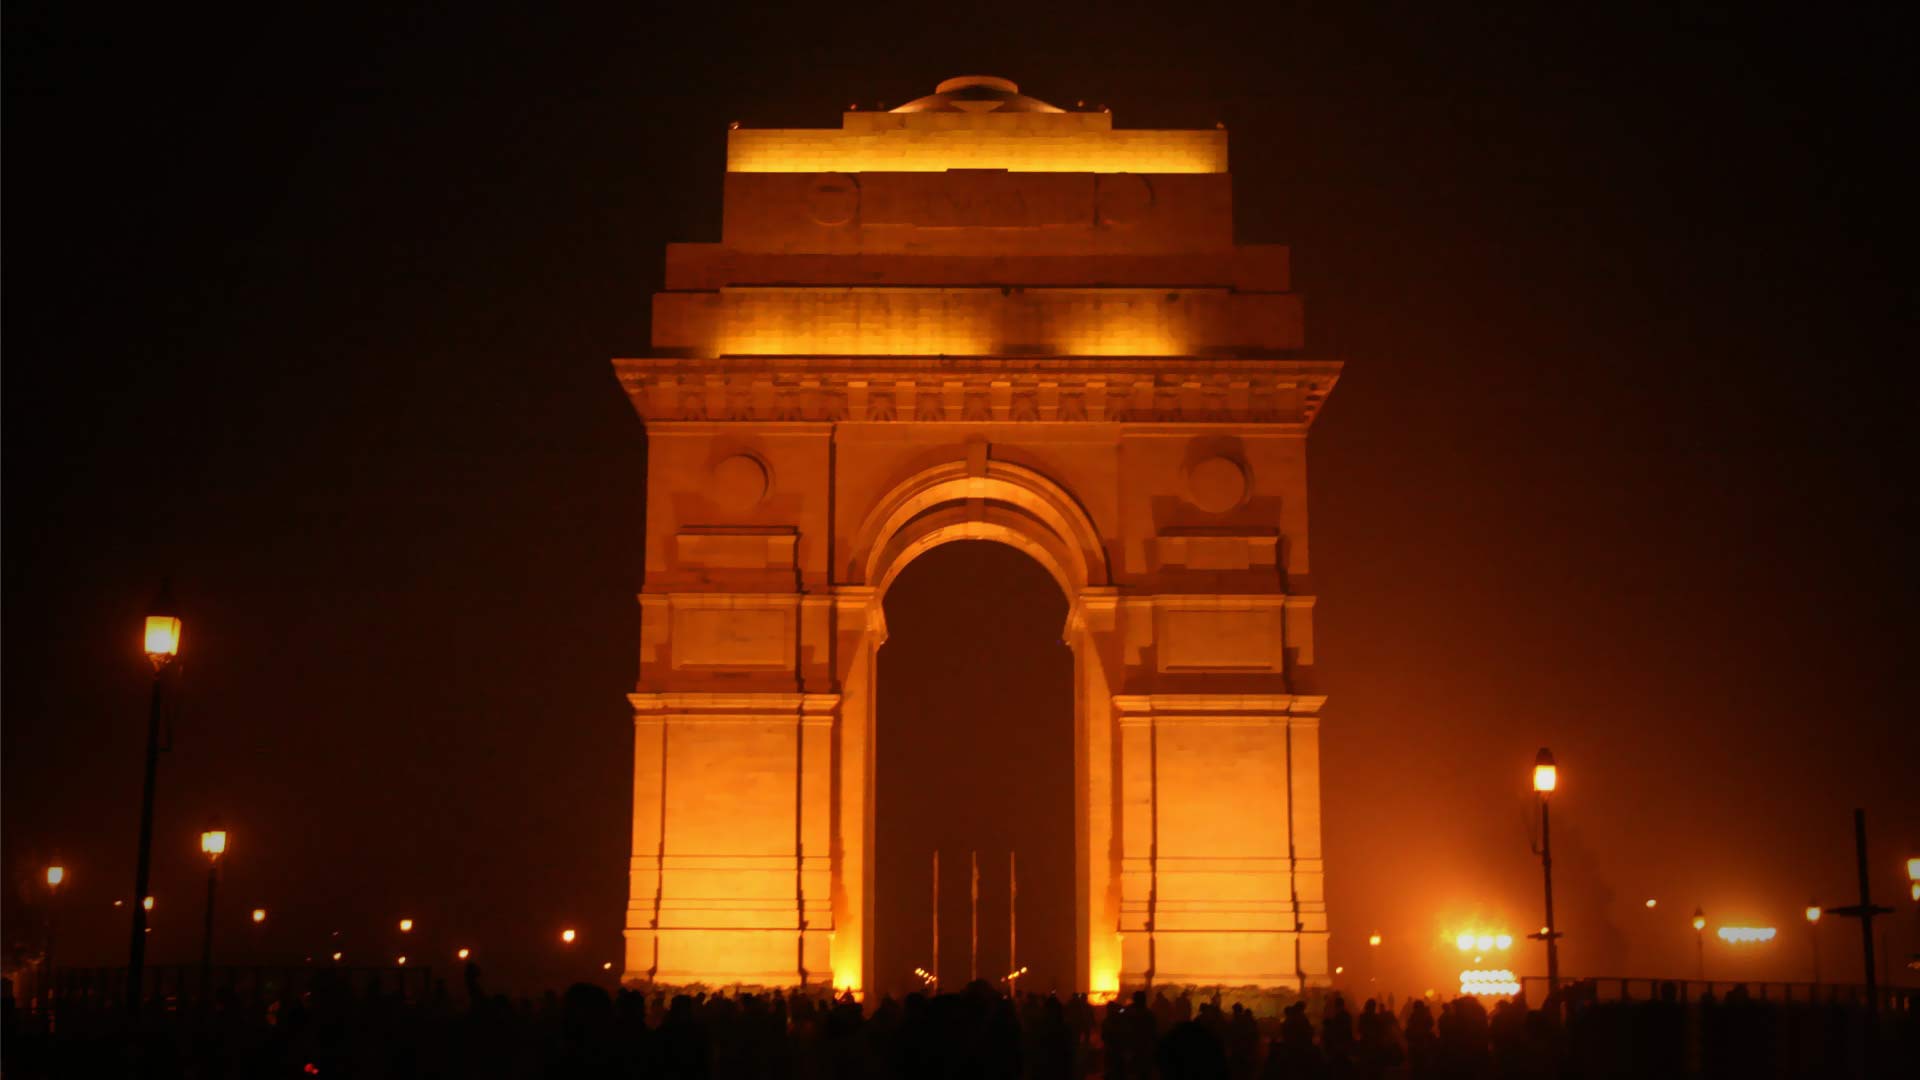 Location, Timings, Entry Fees - India Gate Delhi , HD Wallpaper & Backgrounds